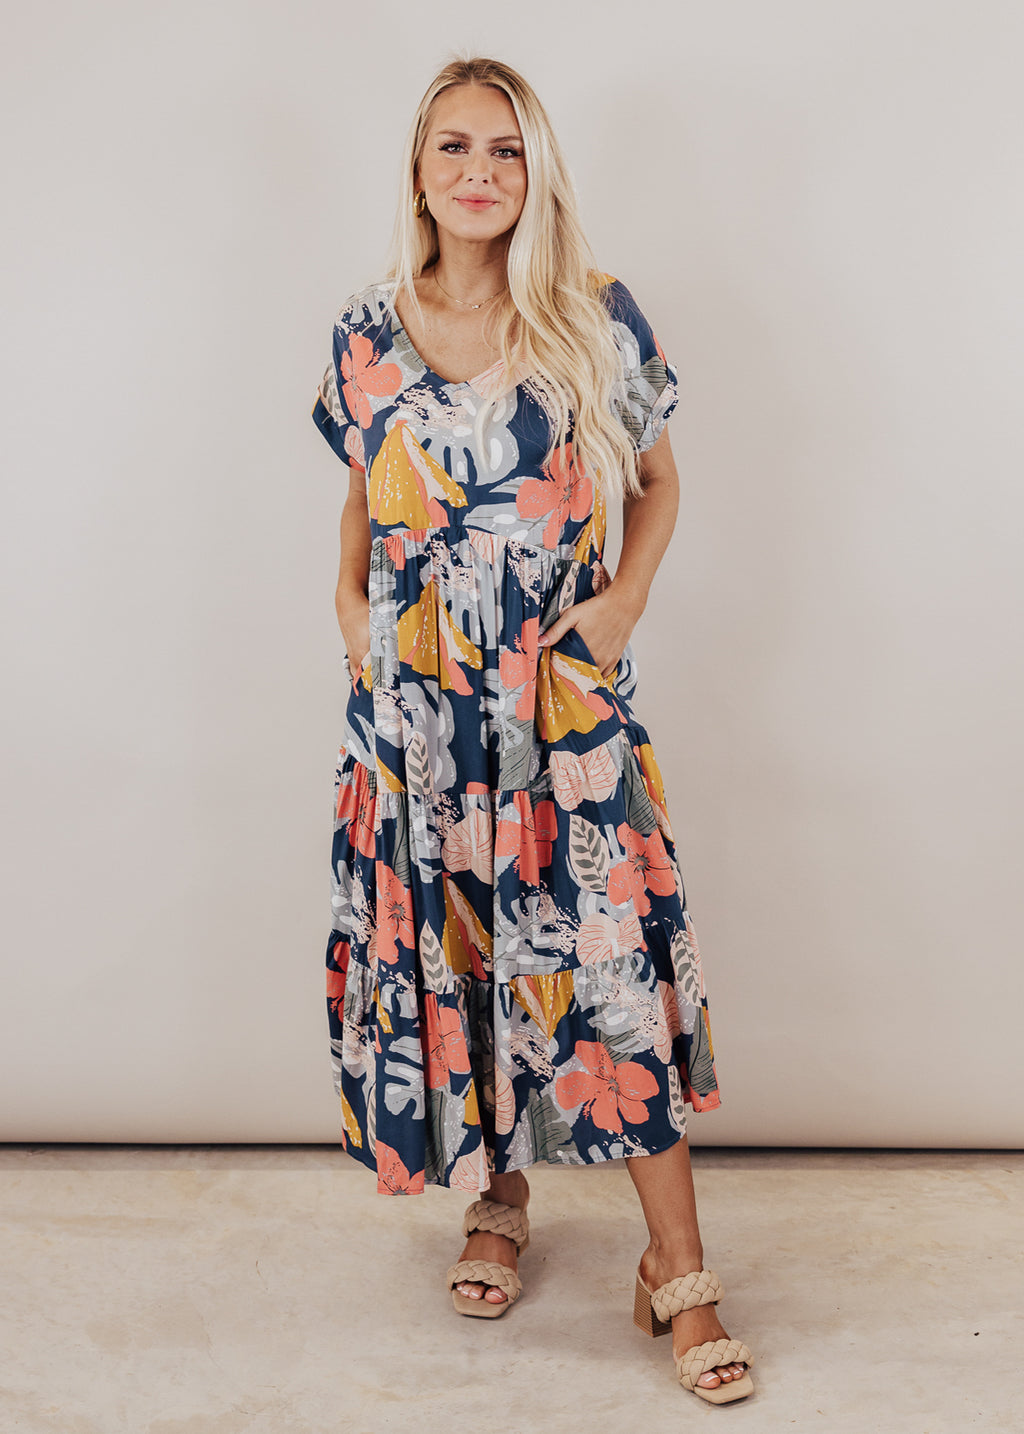 Dresses/Rompers – Chloe Vs Tank The Boutique